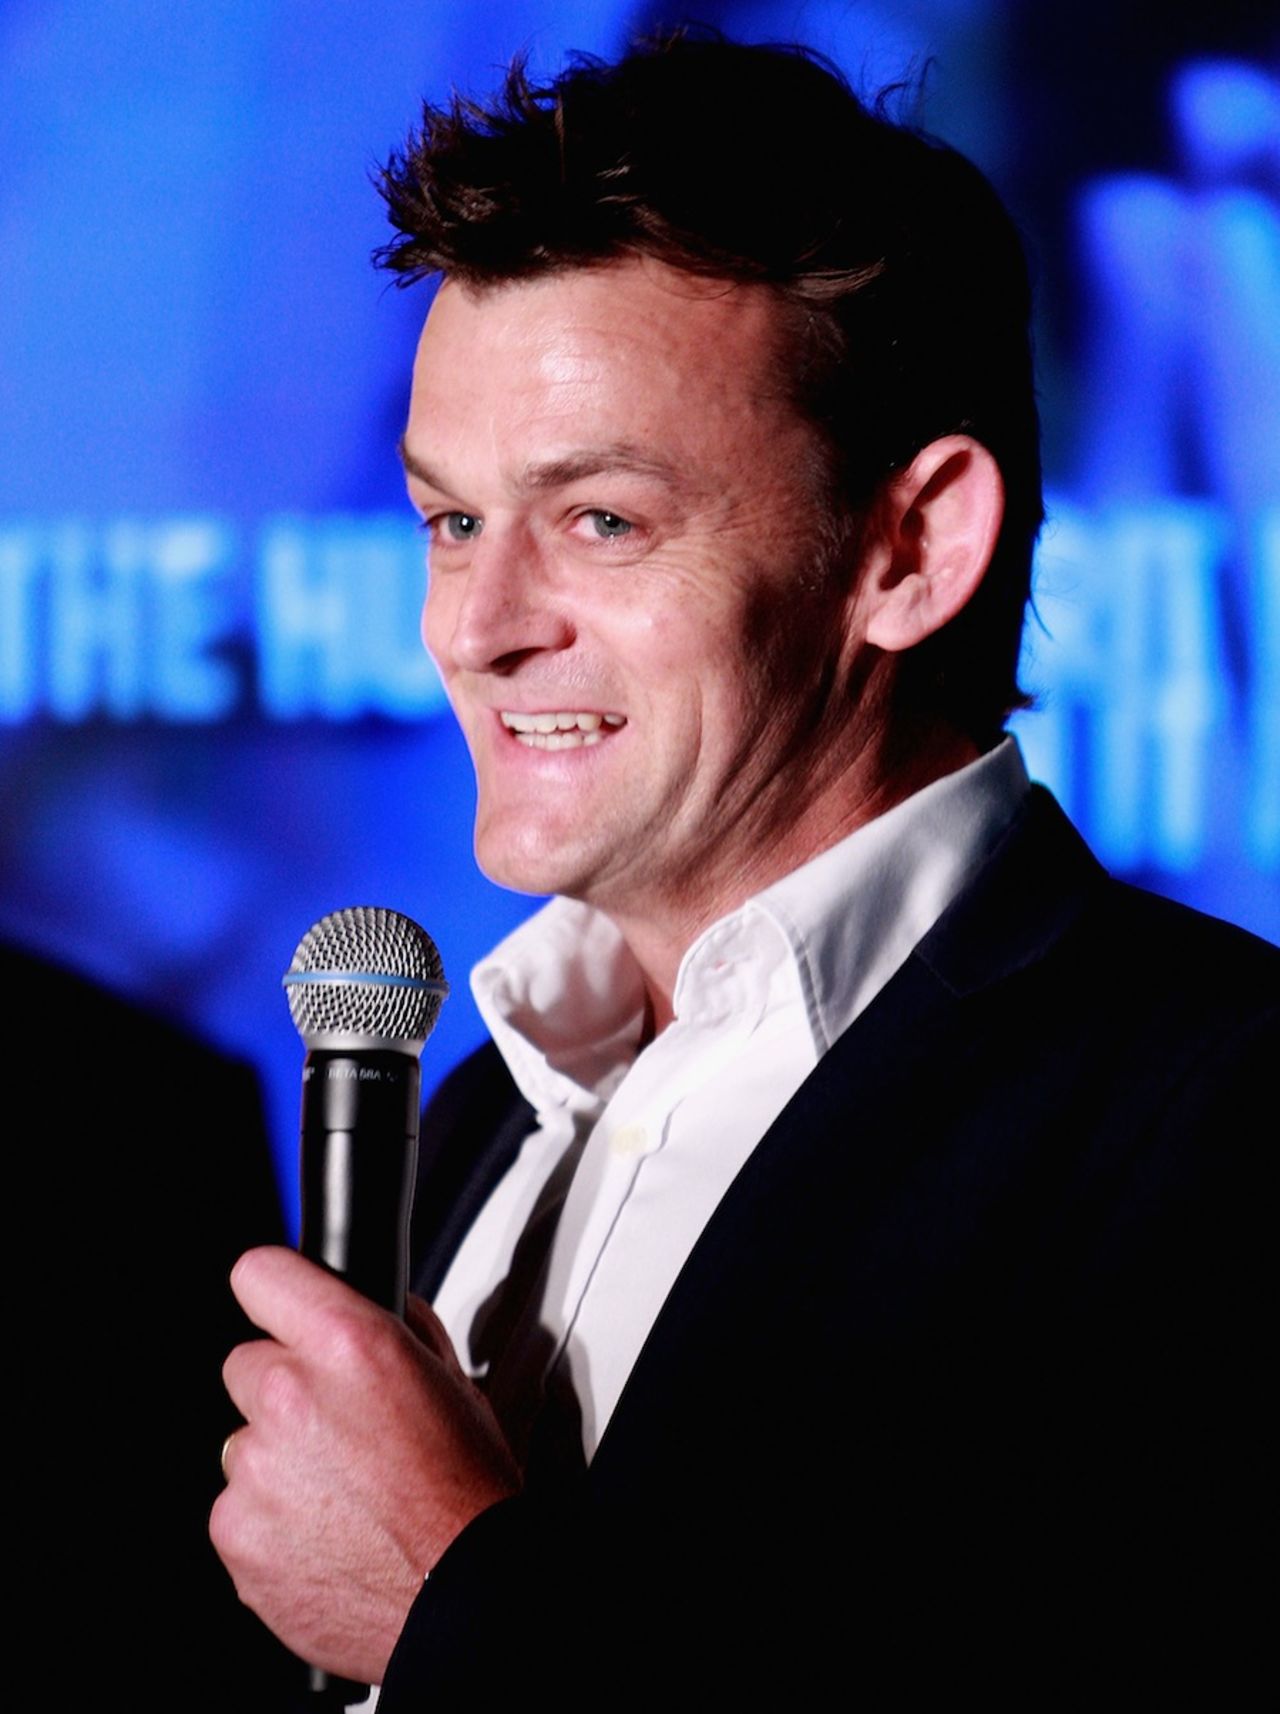 Adam Gilchrist speaks to the media after being inducted into Sport Australia's Hall of Fame, Melbourne, October 11, 2012